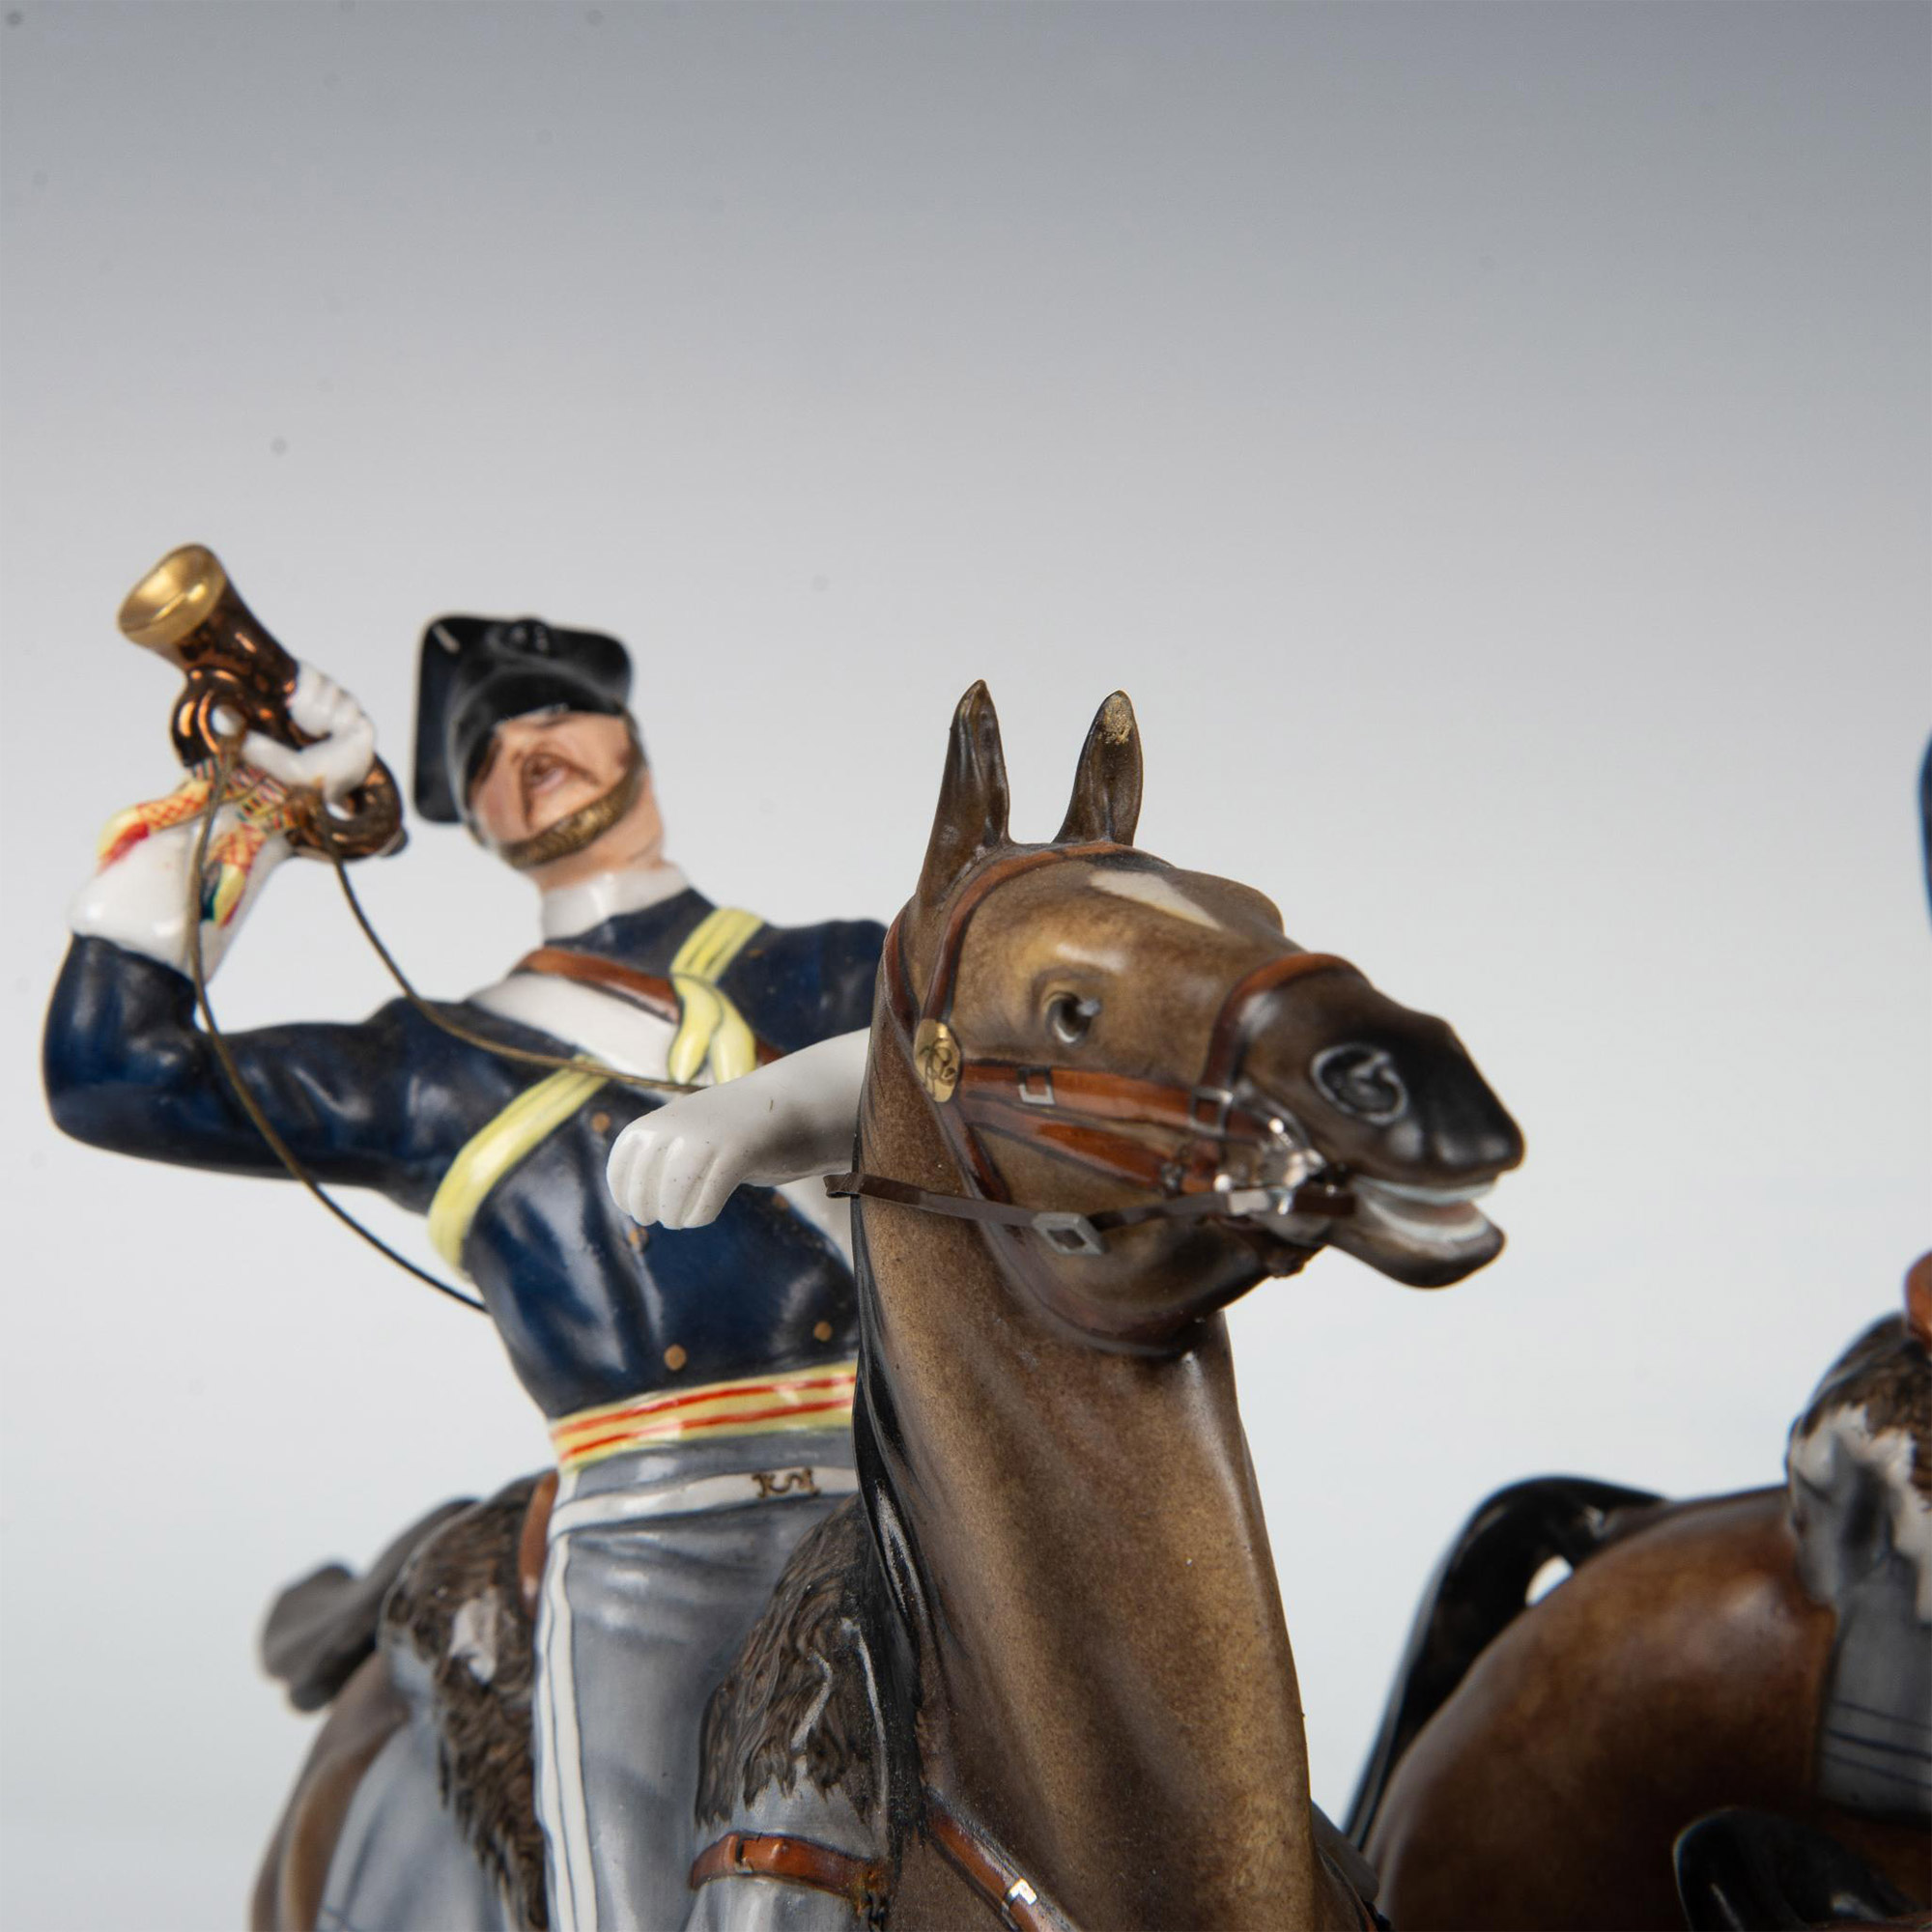 Michael Sutty Sculpture, The Charge of the Light Brigade - Image 10 of 10